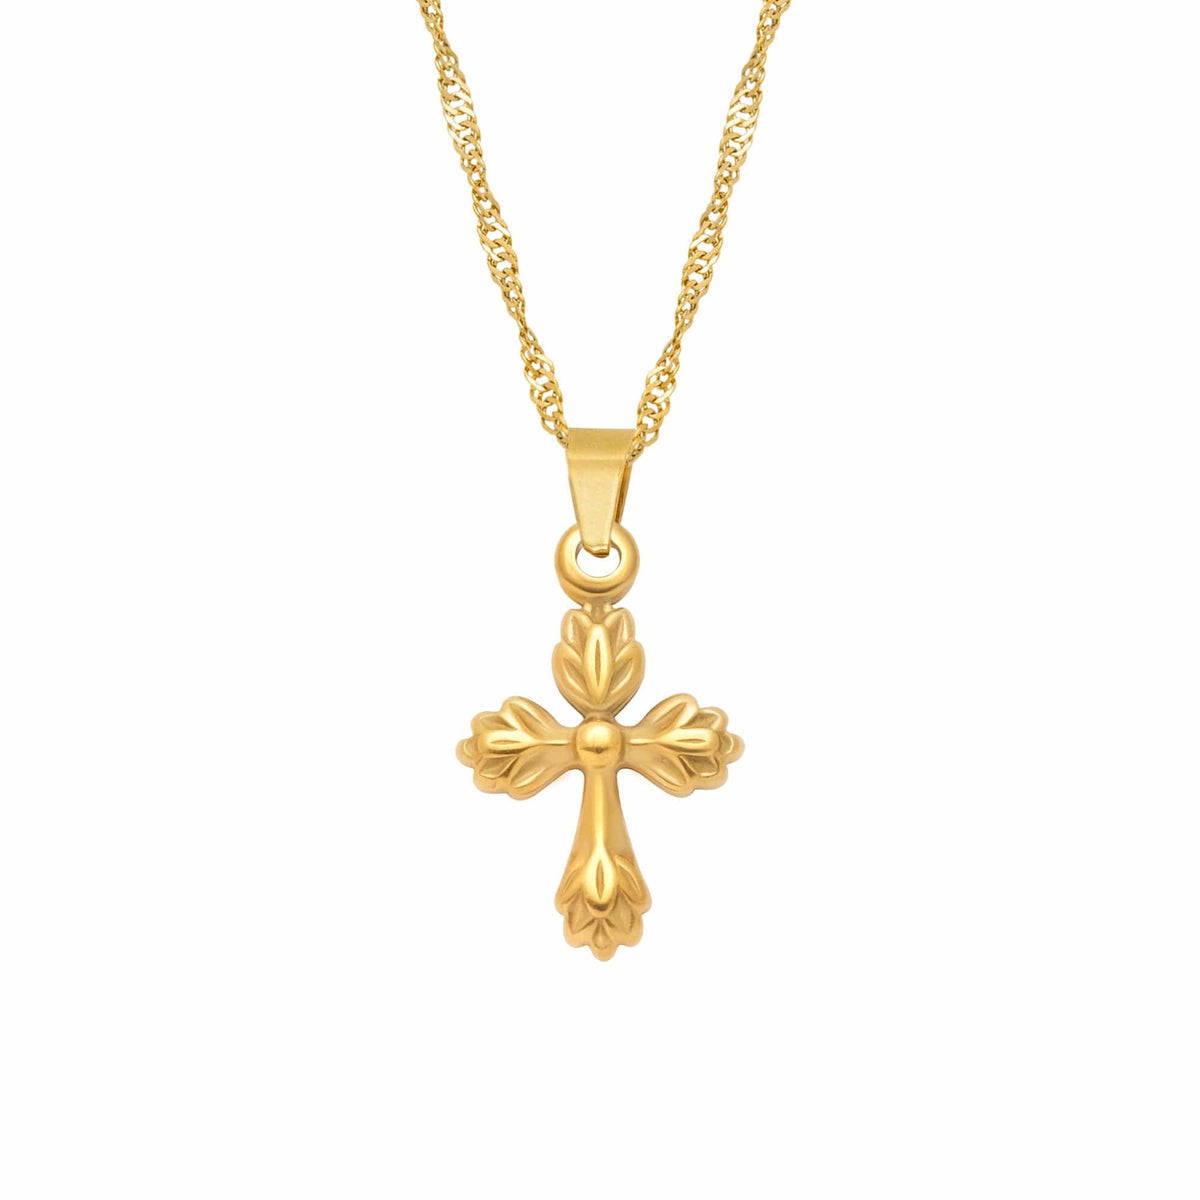 BohoMoon Stainless Steel Serenity Cross Necklace Gold